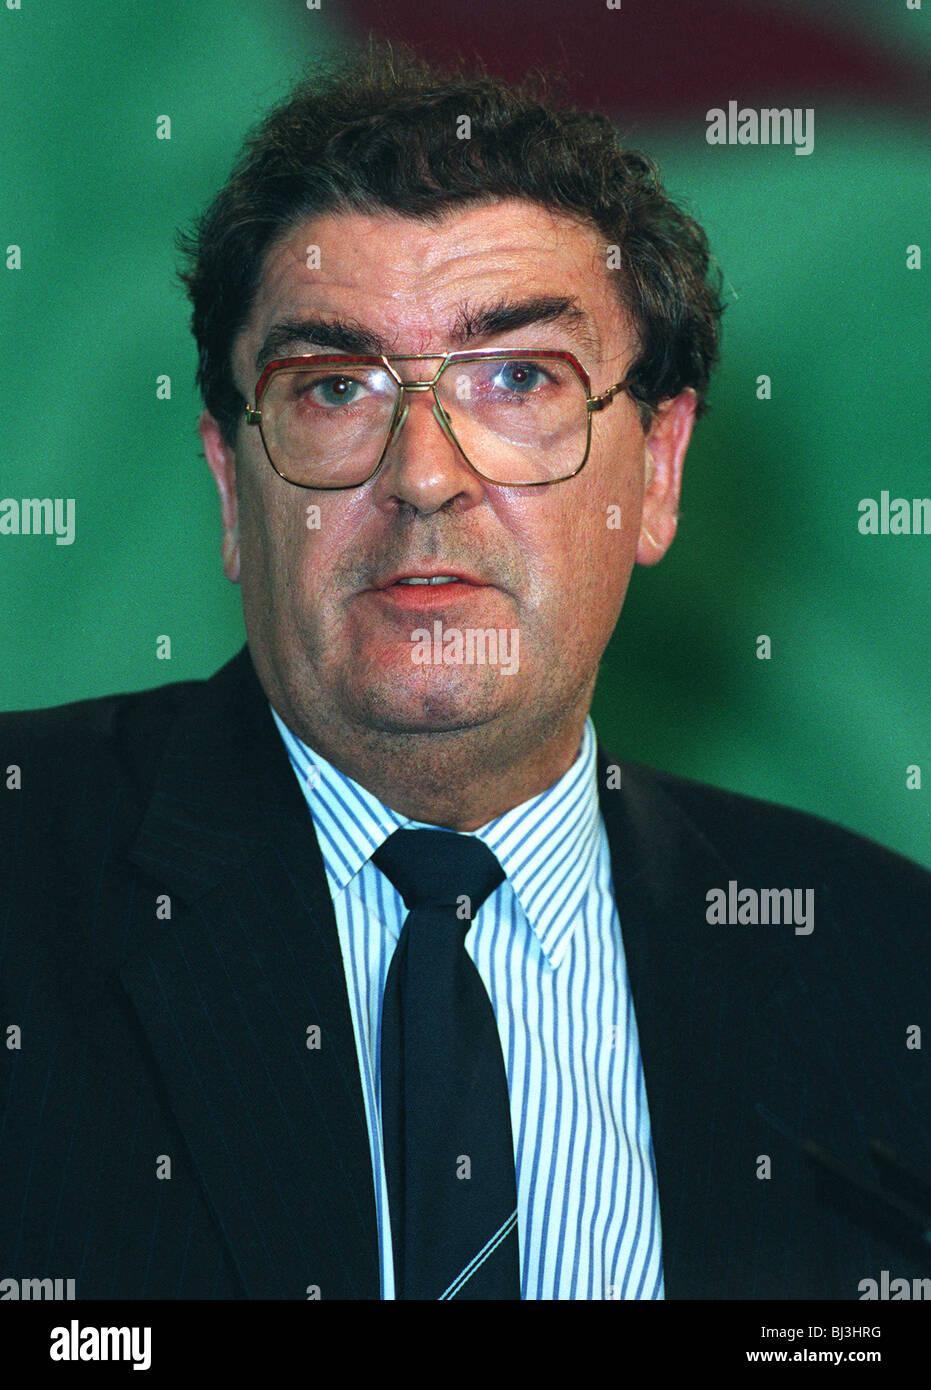 JOHN HUME MP SOCIAL DEMOCRATIC LABOUR PARTY 31 October 1994 Stock Photo